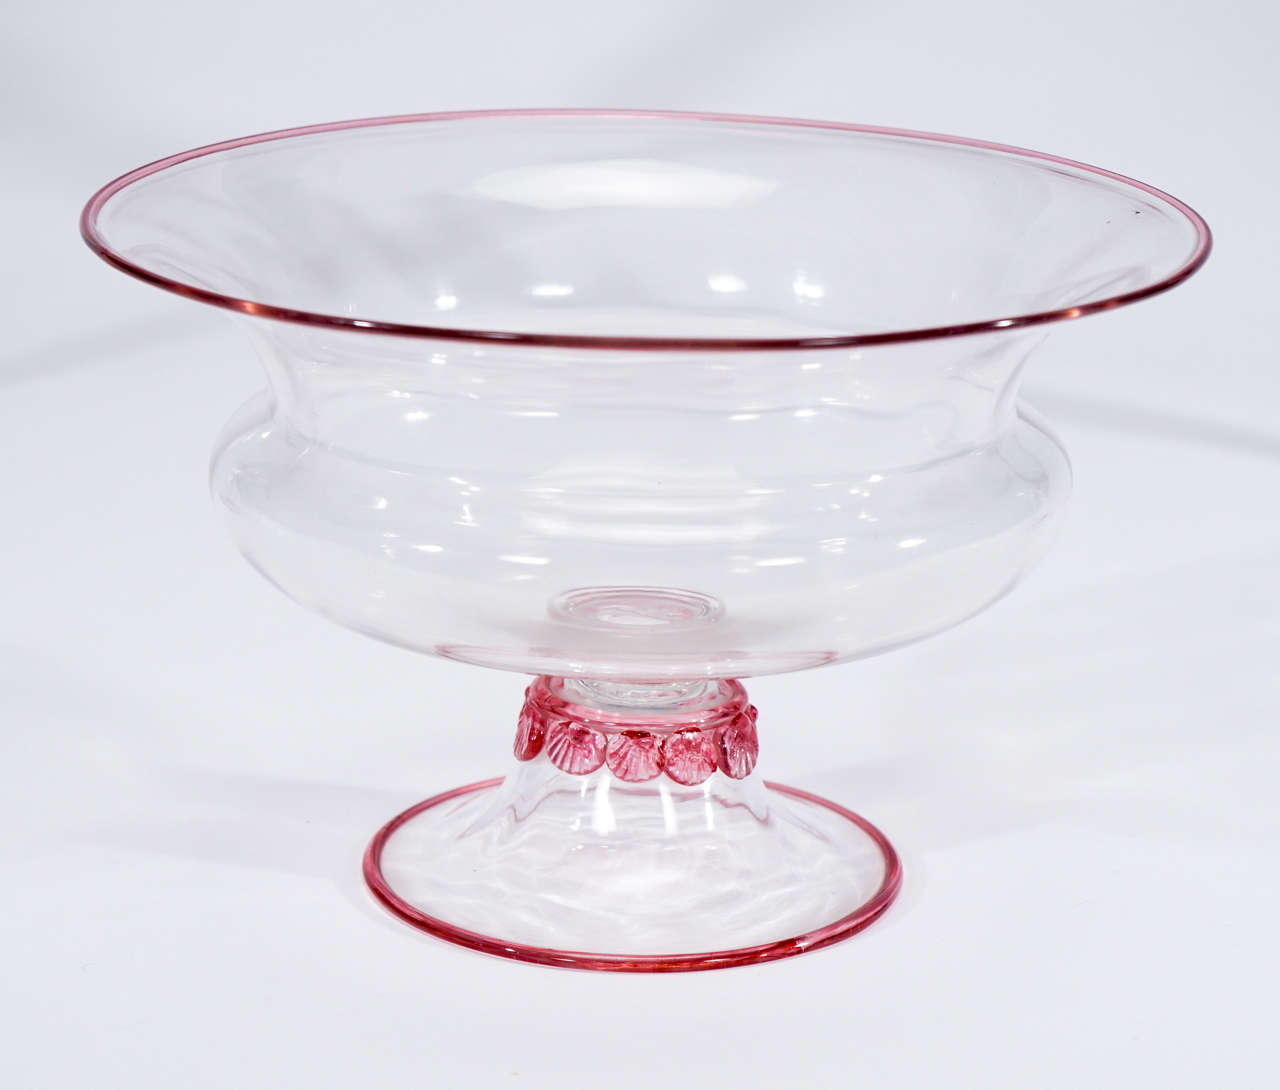 A rare and elegant three-piece Steuben centerpiece set consists of a large footed center bowl and a pair of matching candlesticks. The clear body is embellished with applied 